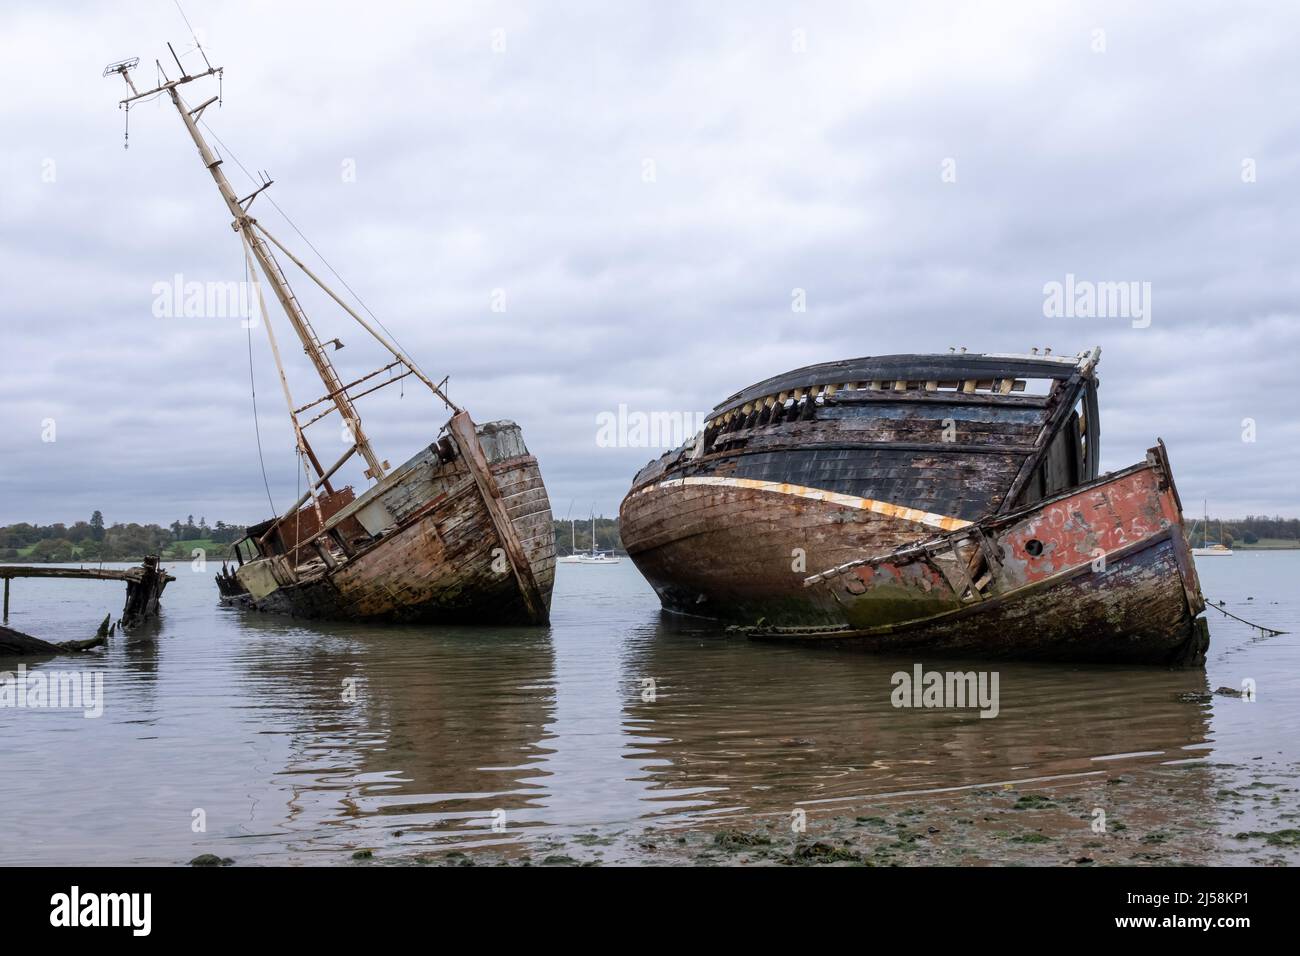 Collection of wooden boat wrecks at the boat 'graveyard' at Pin Mill, along the banks of the River Orwell near to Ipswich in Suffolk, England. Stock Photo